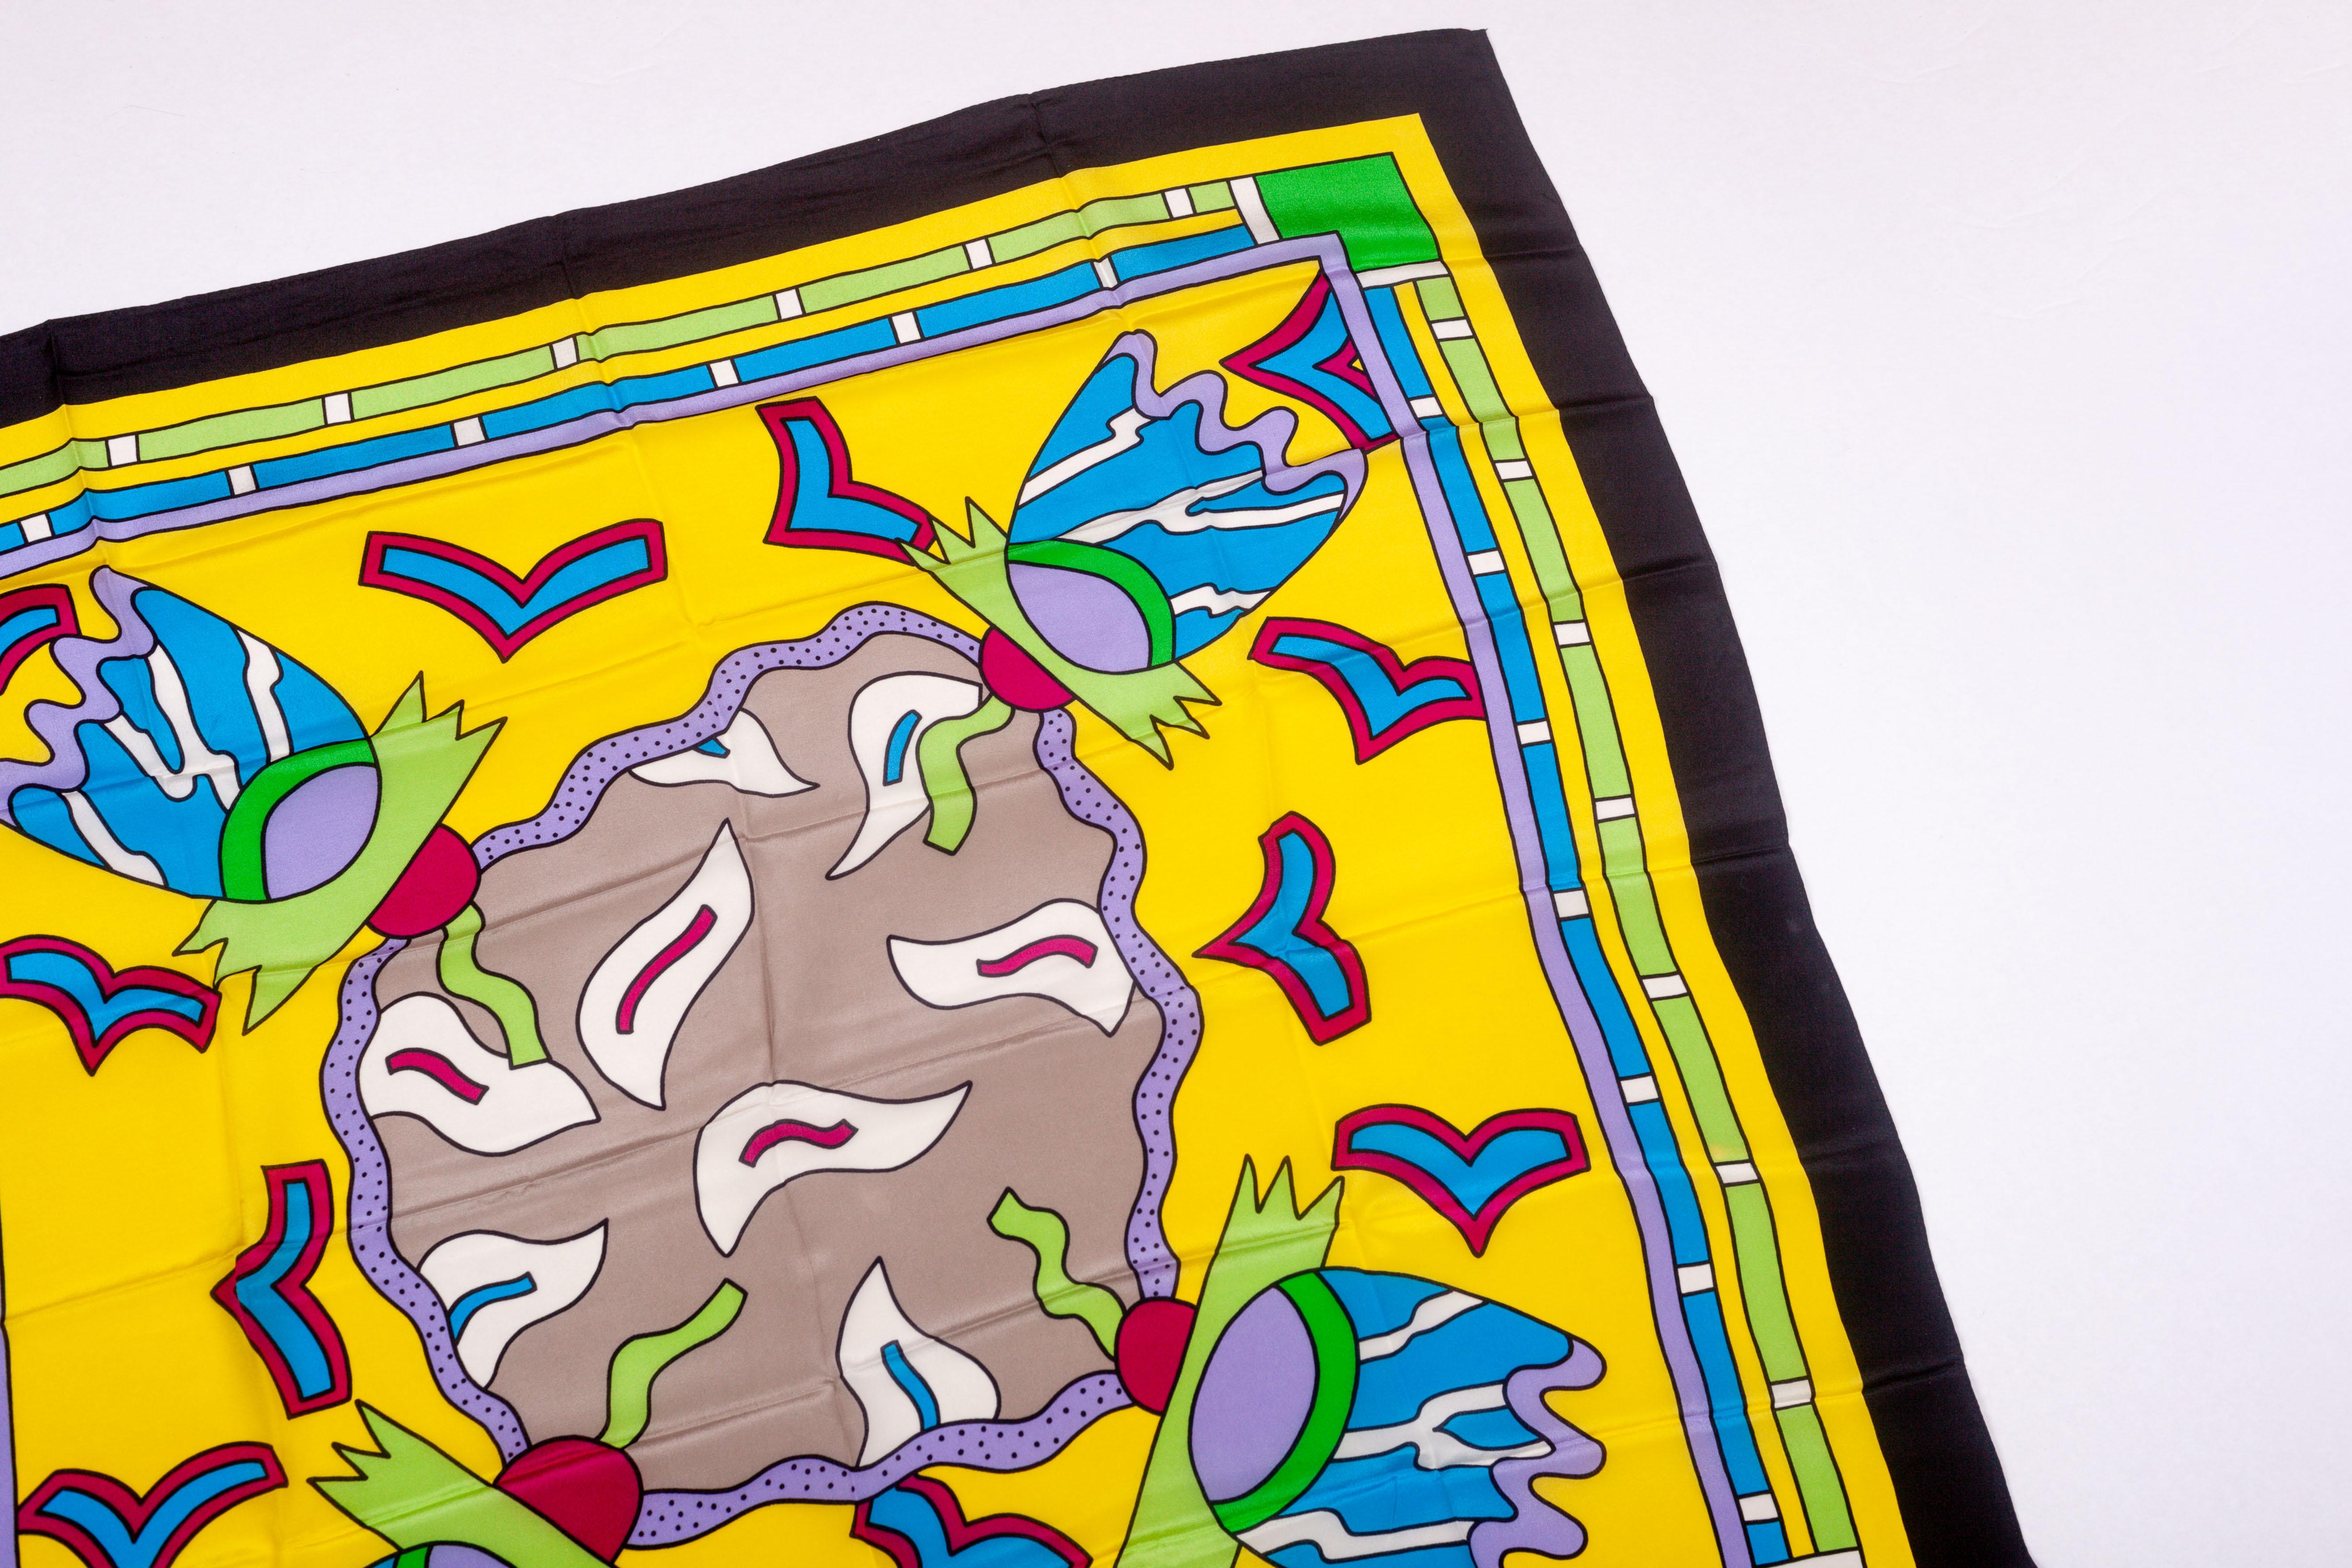 Memphis Floral Silk Scarf by Nathalie du Pasquier for Esprit, 1990s In Good Condition For Sale In Chicago, IL